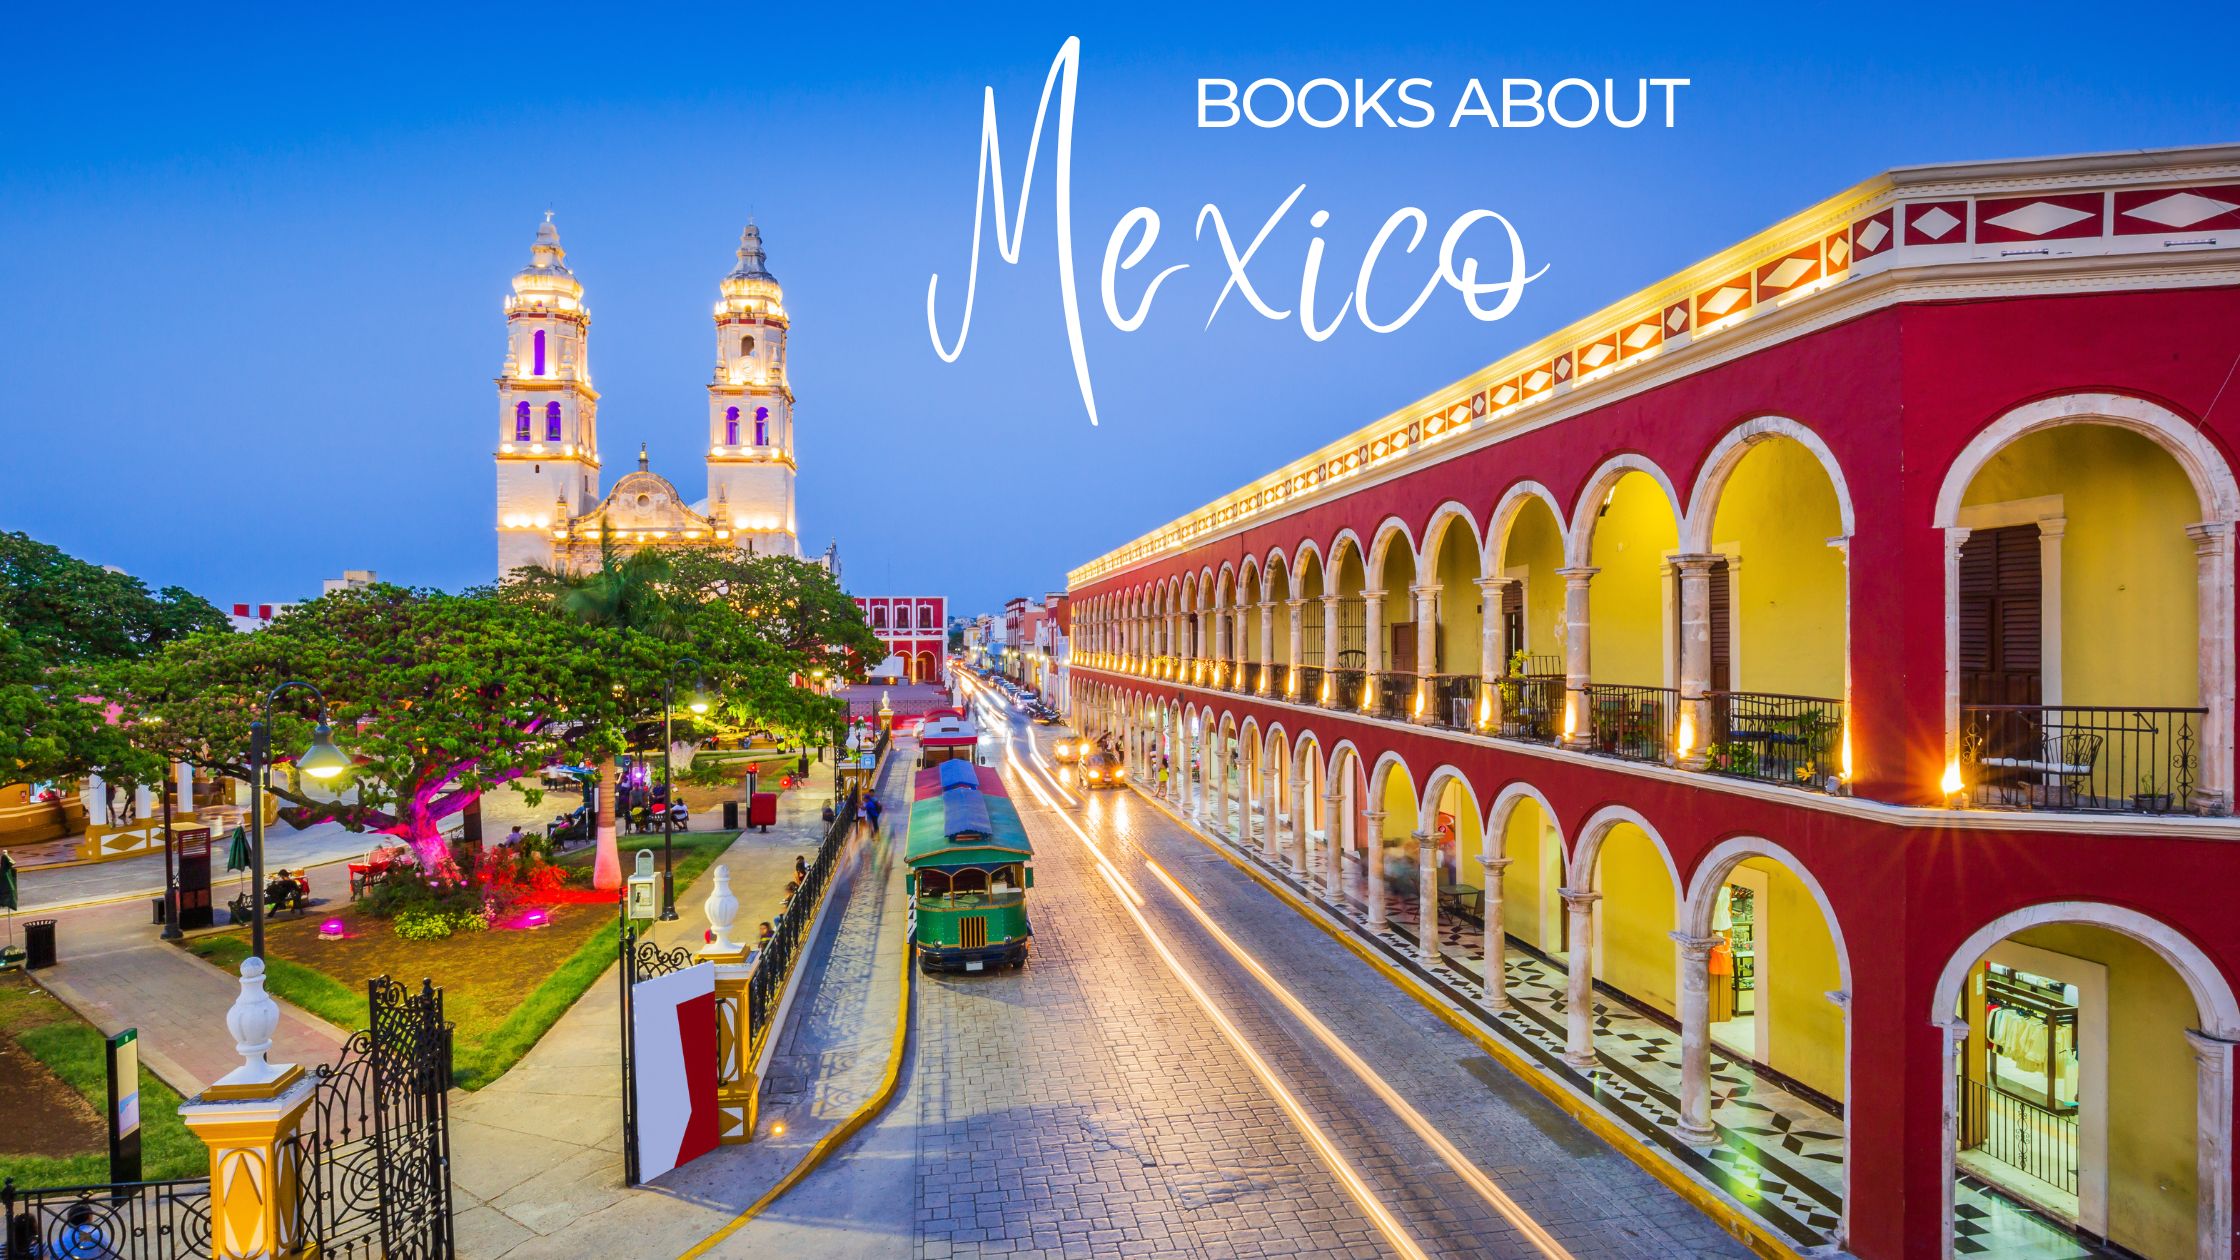 39 Best Books Set in + About Mexico